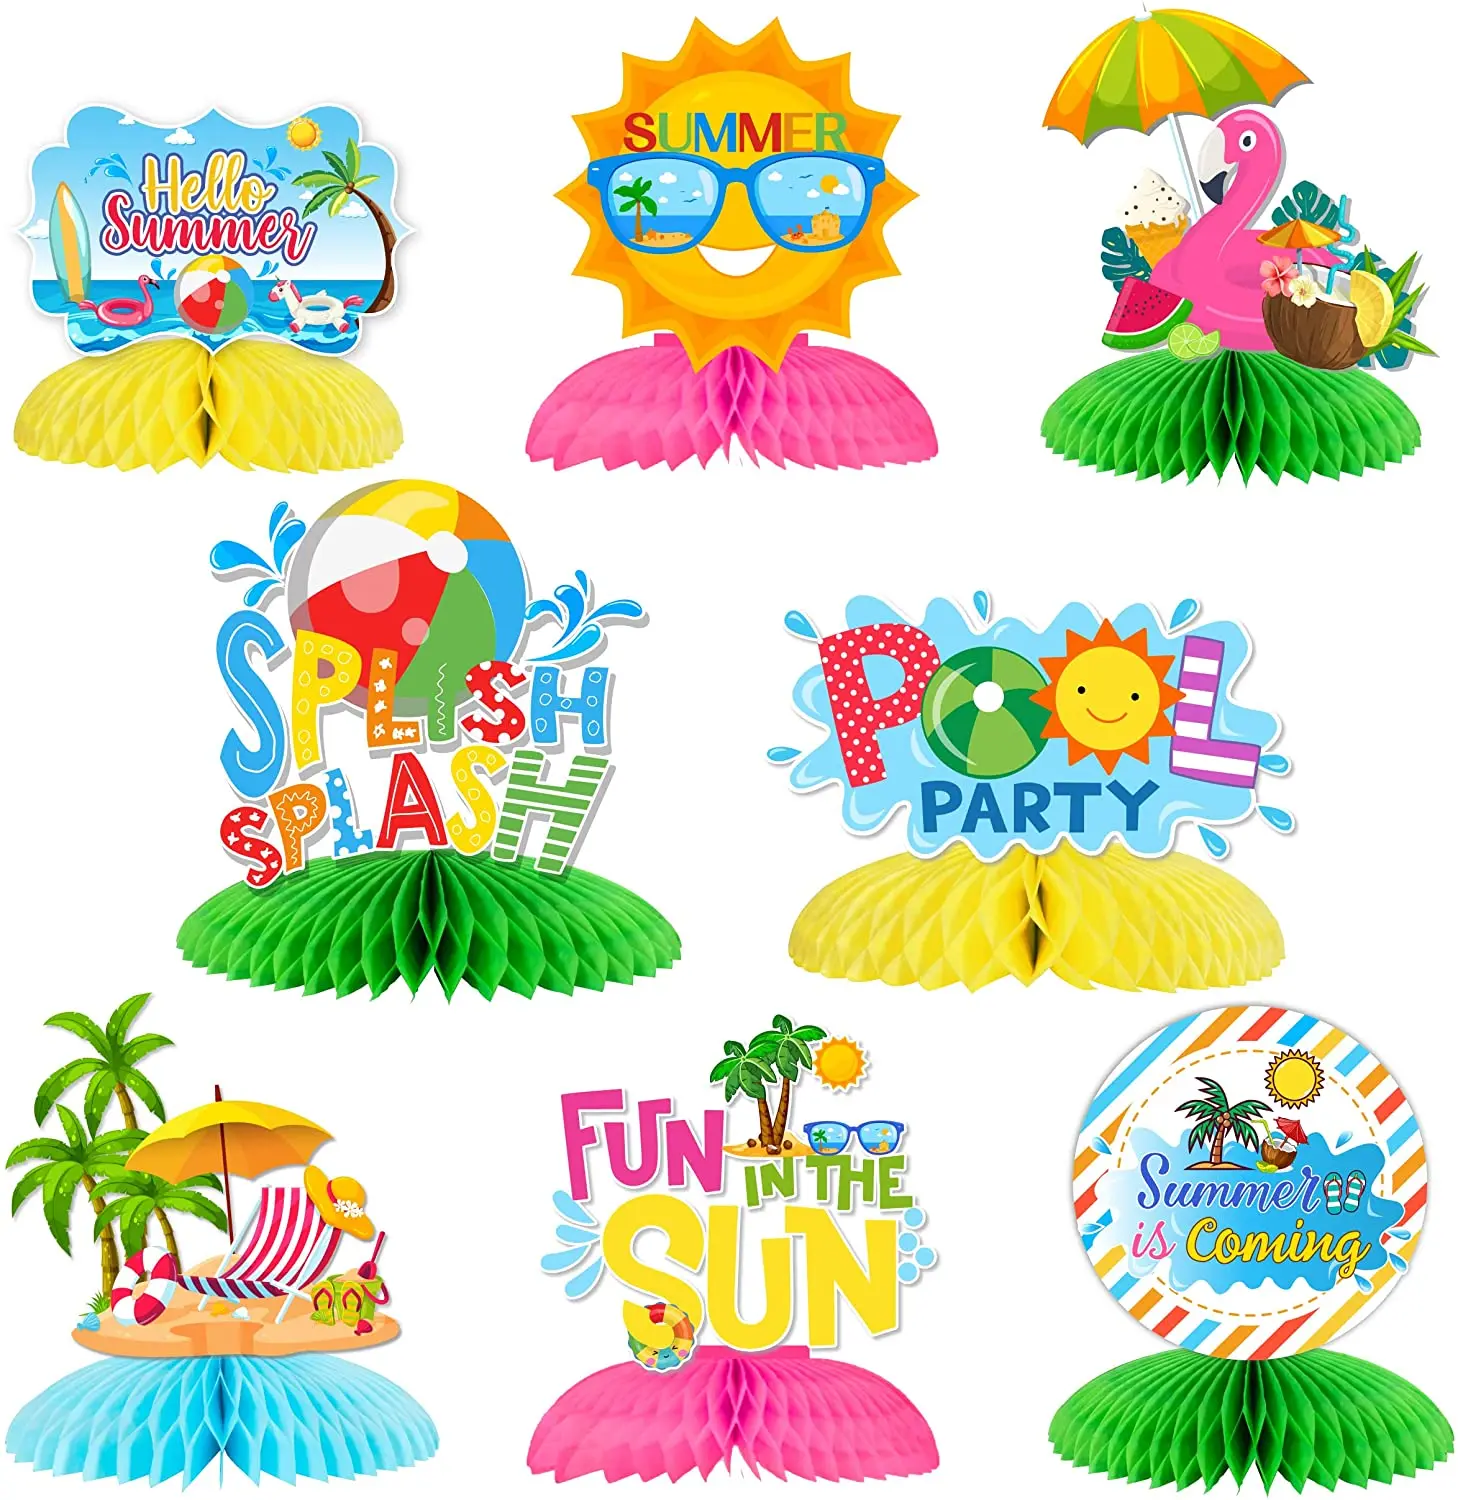 Cheereveal Summer Beach Pool Theme Honeycomb Centerpieces 3D Table